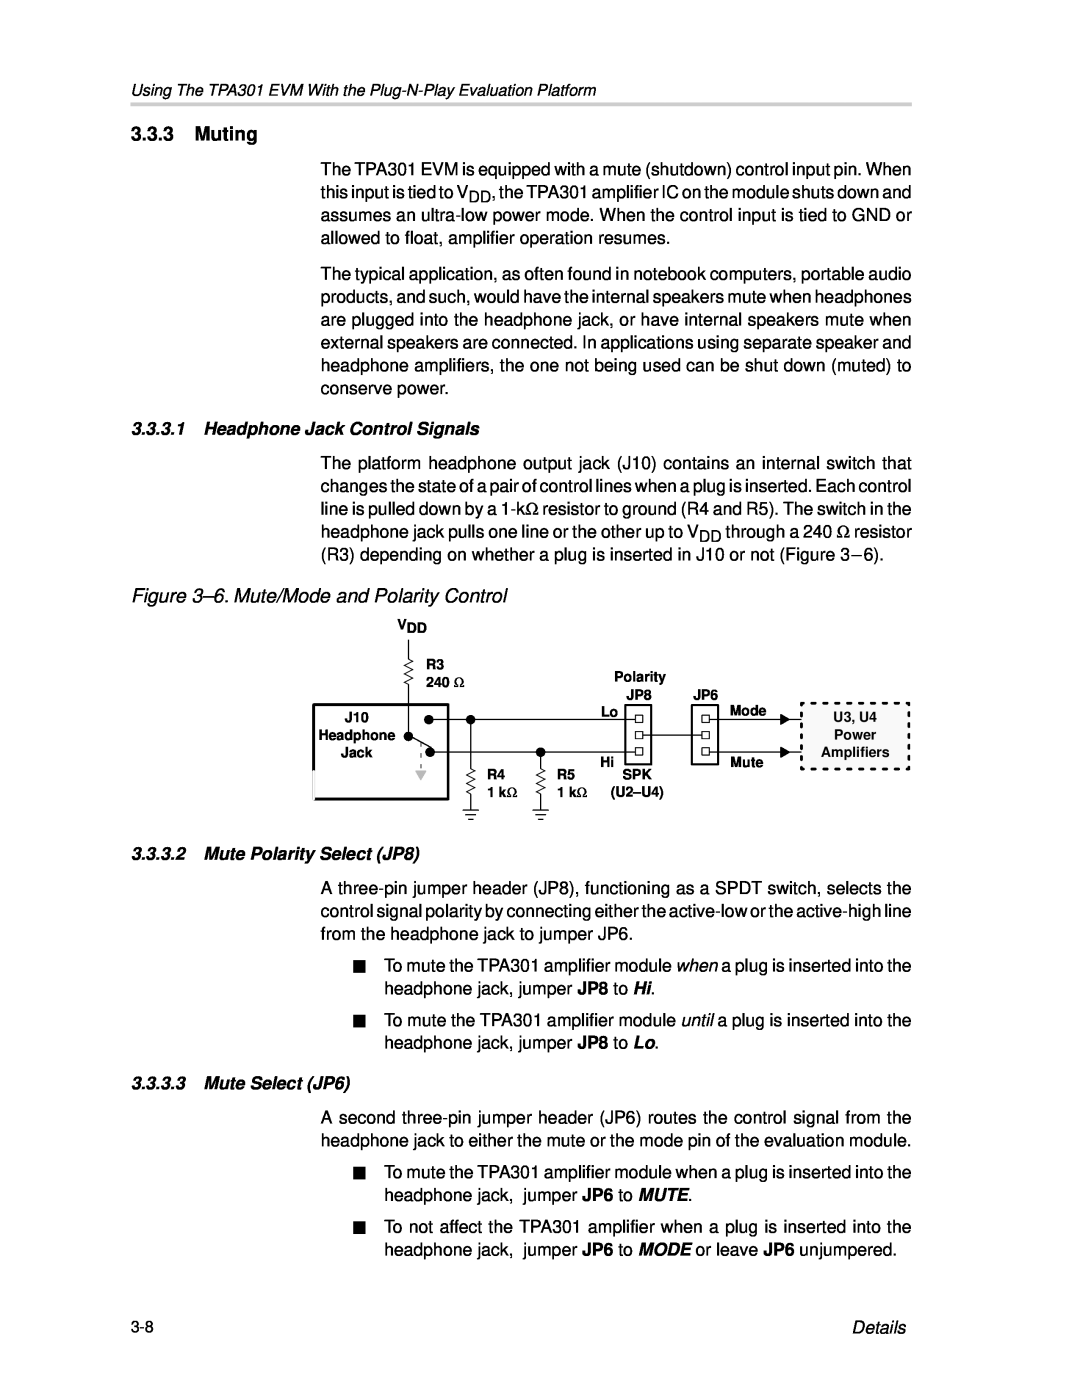 Texas Instruments TPA301 manual 3.3.3Muting, 6.Mute/Mode and Polarity Control, Details 